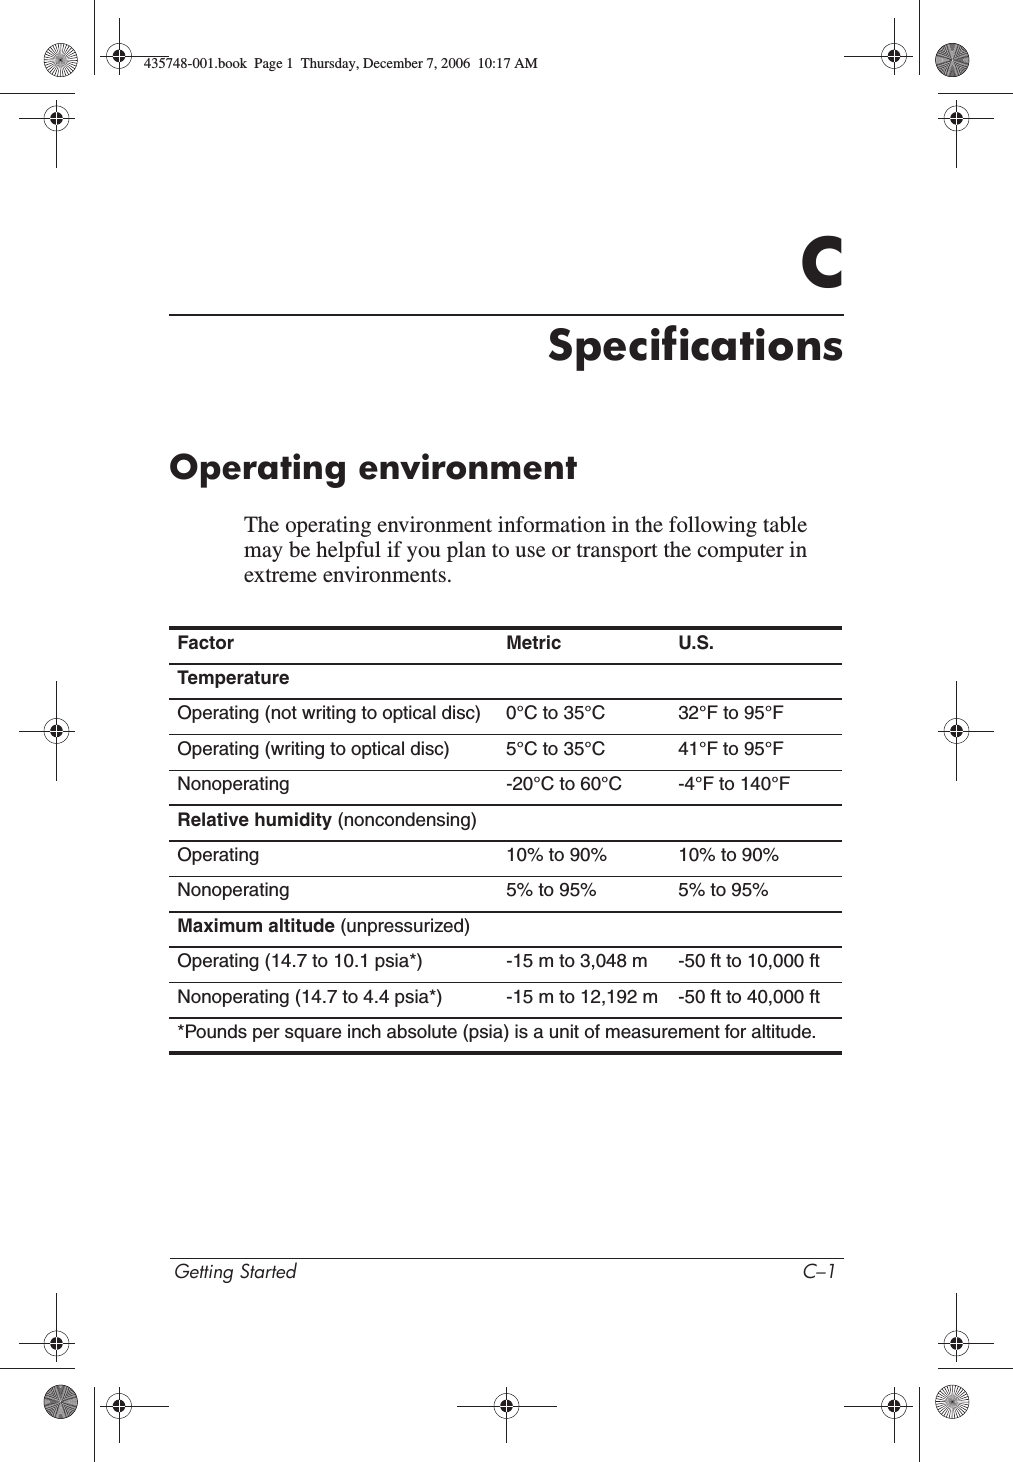 Getting Started C–1CSpecificationsOperating environmentThe operating environment information in the following table may be helpful if you plan to use or transport the computer in extreme environments.Factor Metric U.S.TemperatureOperating (not writing to optical disc) 0°C to 35°C 32°F to 95°FOperating (writing to optical disc) 5°C to 35°C 41°F to 95°FNonoperating -20°C to 60°C -4°F to 140°FRelative humidity (noncondensing)Operating 10% to 90% 10% to 90%Nonoperating 5% to 95% 5% to 95%Maximum altitude (unpressurized)Operating (14.7 to 10.1 psia*) -15 m to 3,048 m -50 ft to 10,000 ftNonoperating (14.7 to 4.4 psia*) -15 m to 12,192 m -50 ft to 40,000 ft*Pounds per square inch absolute (psia) is a unit of measurement for altitude.435748-001.book  Page 1  Thursday, December 7, 2006  10:17 AM